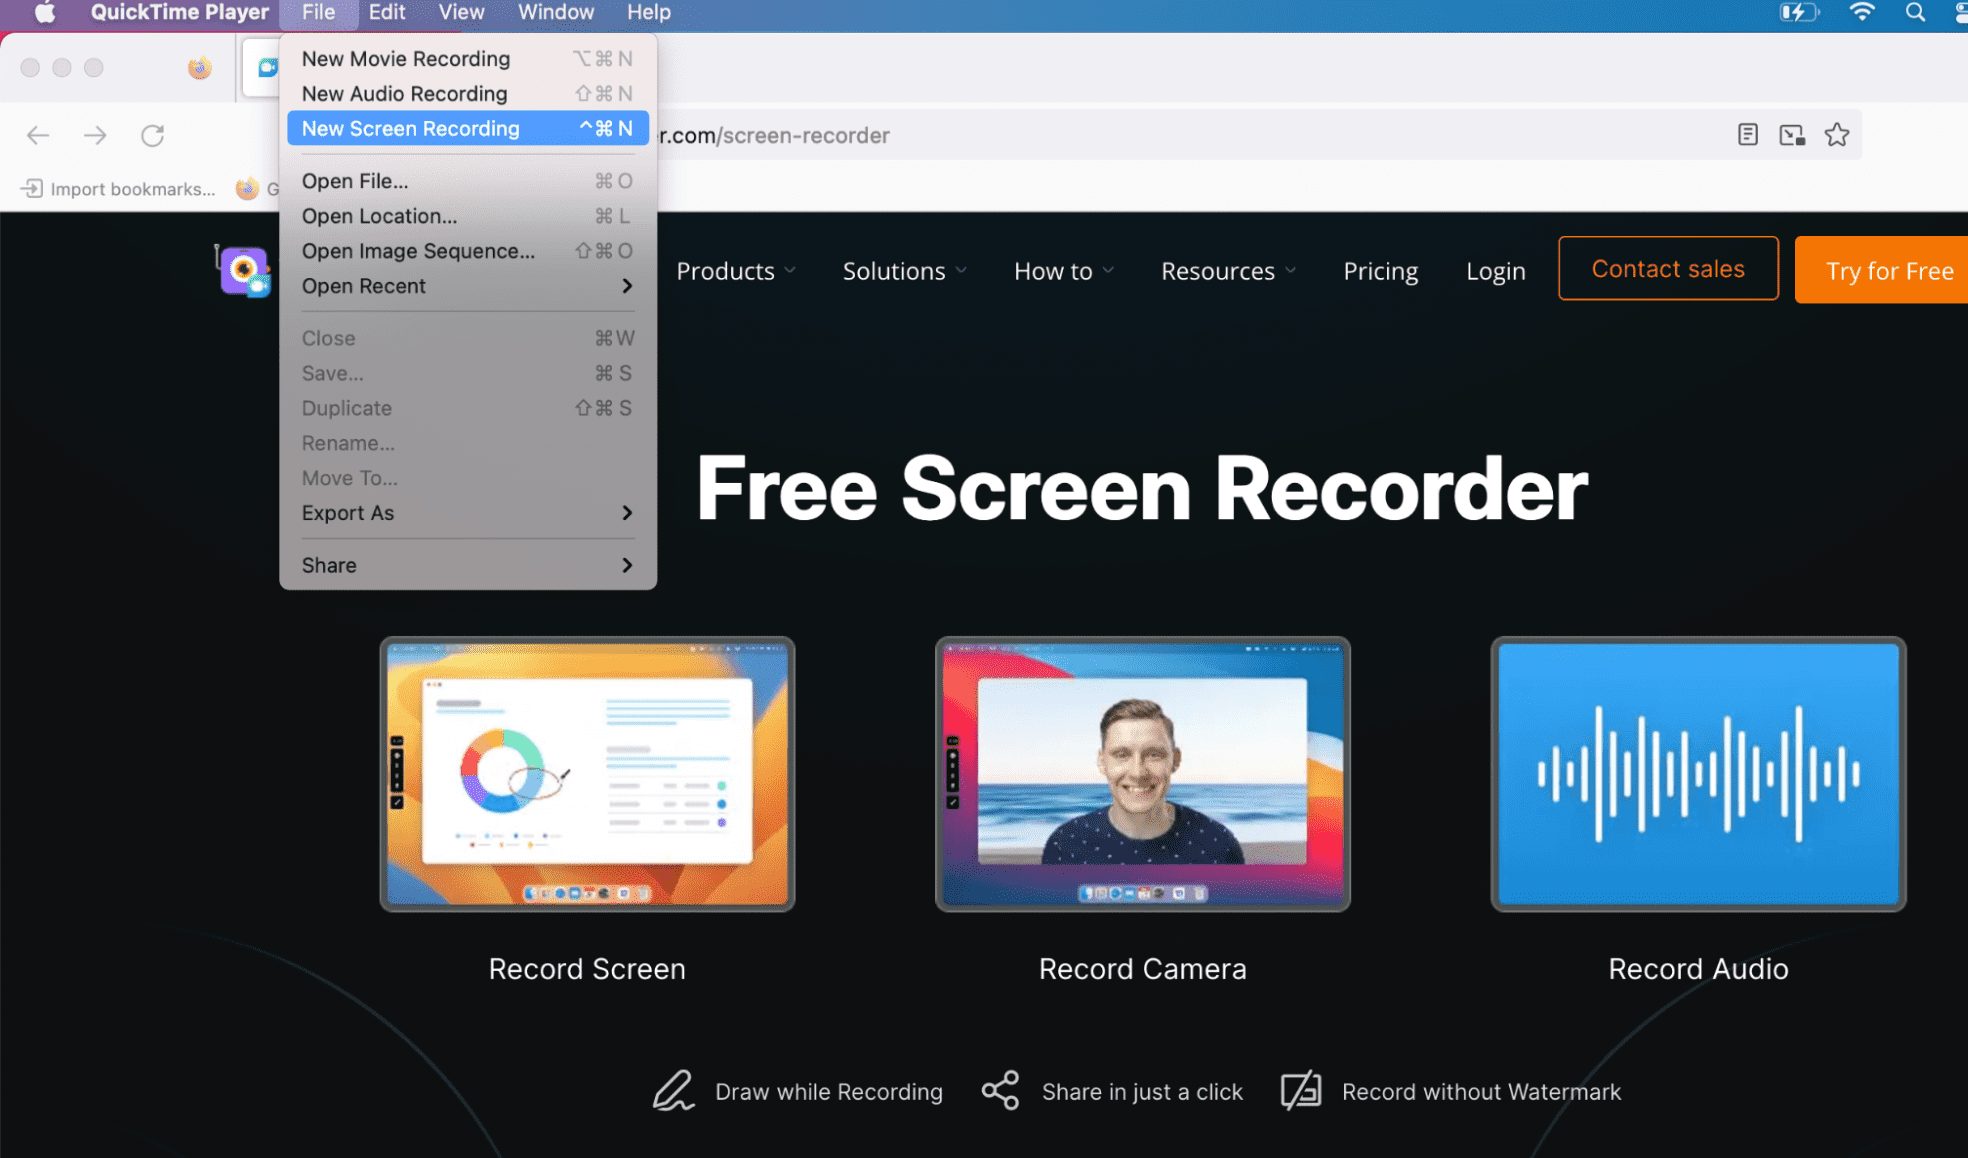 Launch QuickTime Player on your Mac